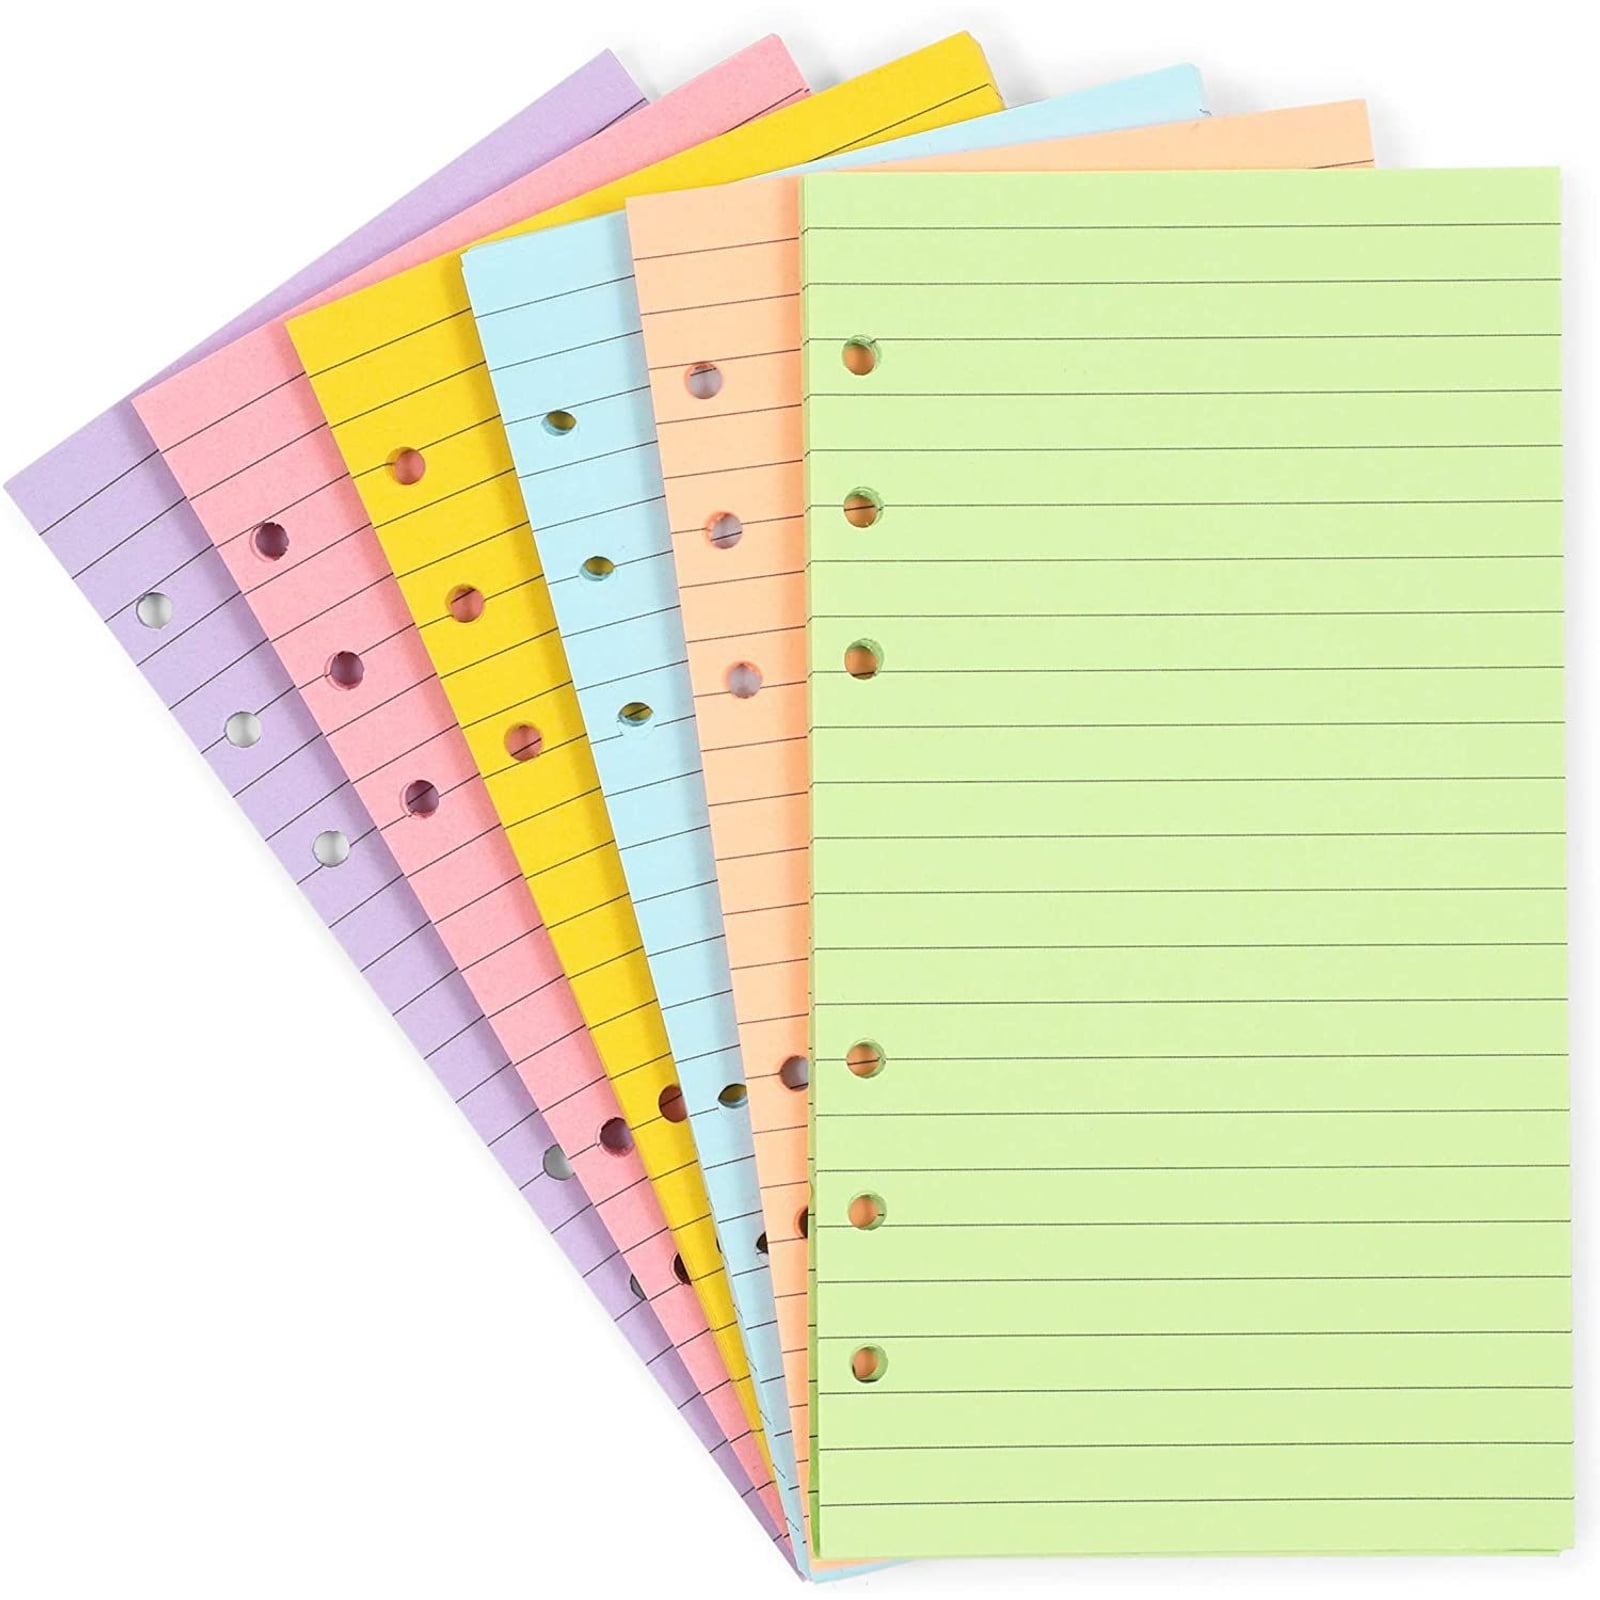 15 Double-Sided sheets fits six-ring binders A5 size Notes Planner insert 